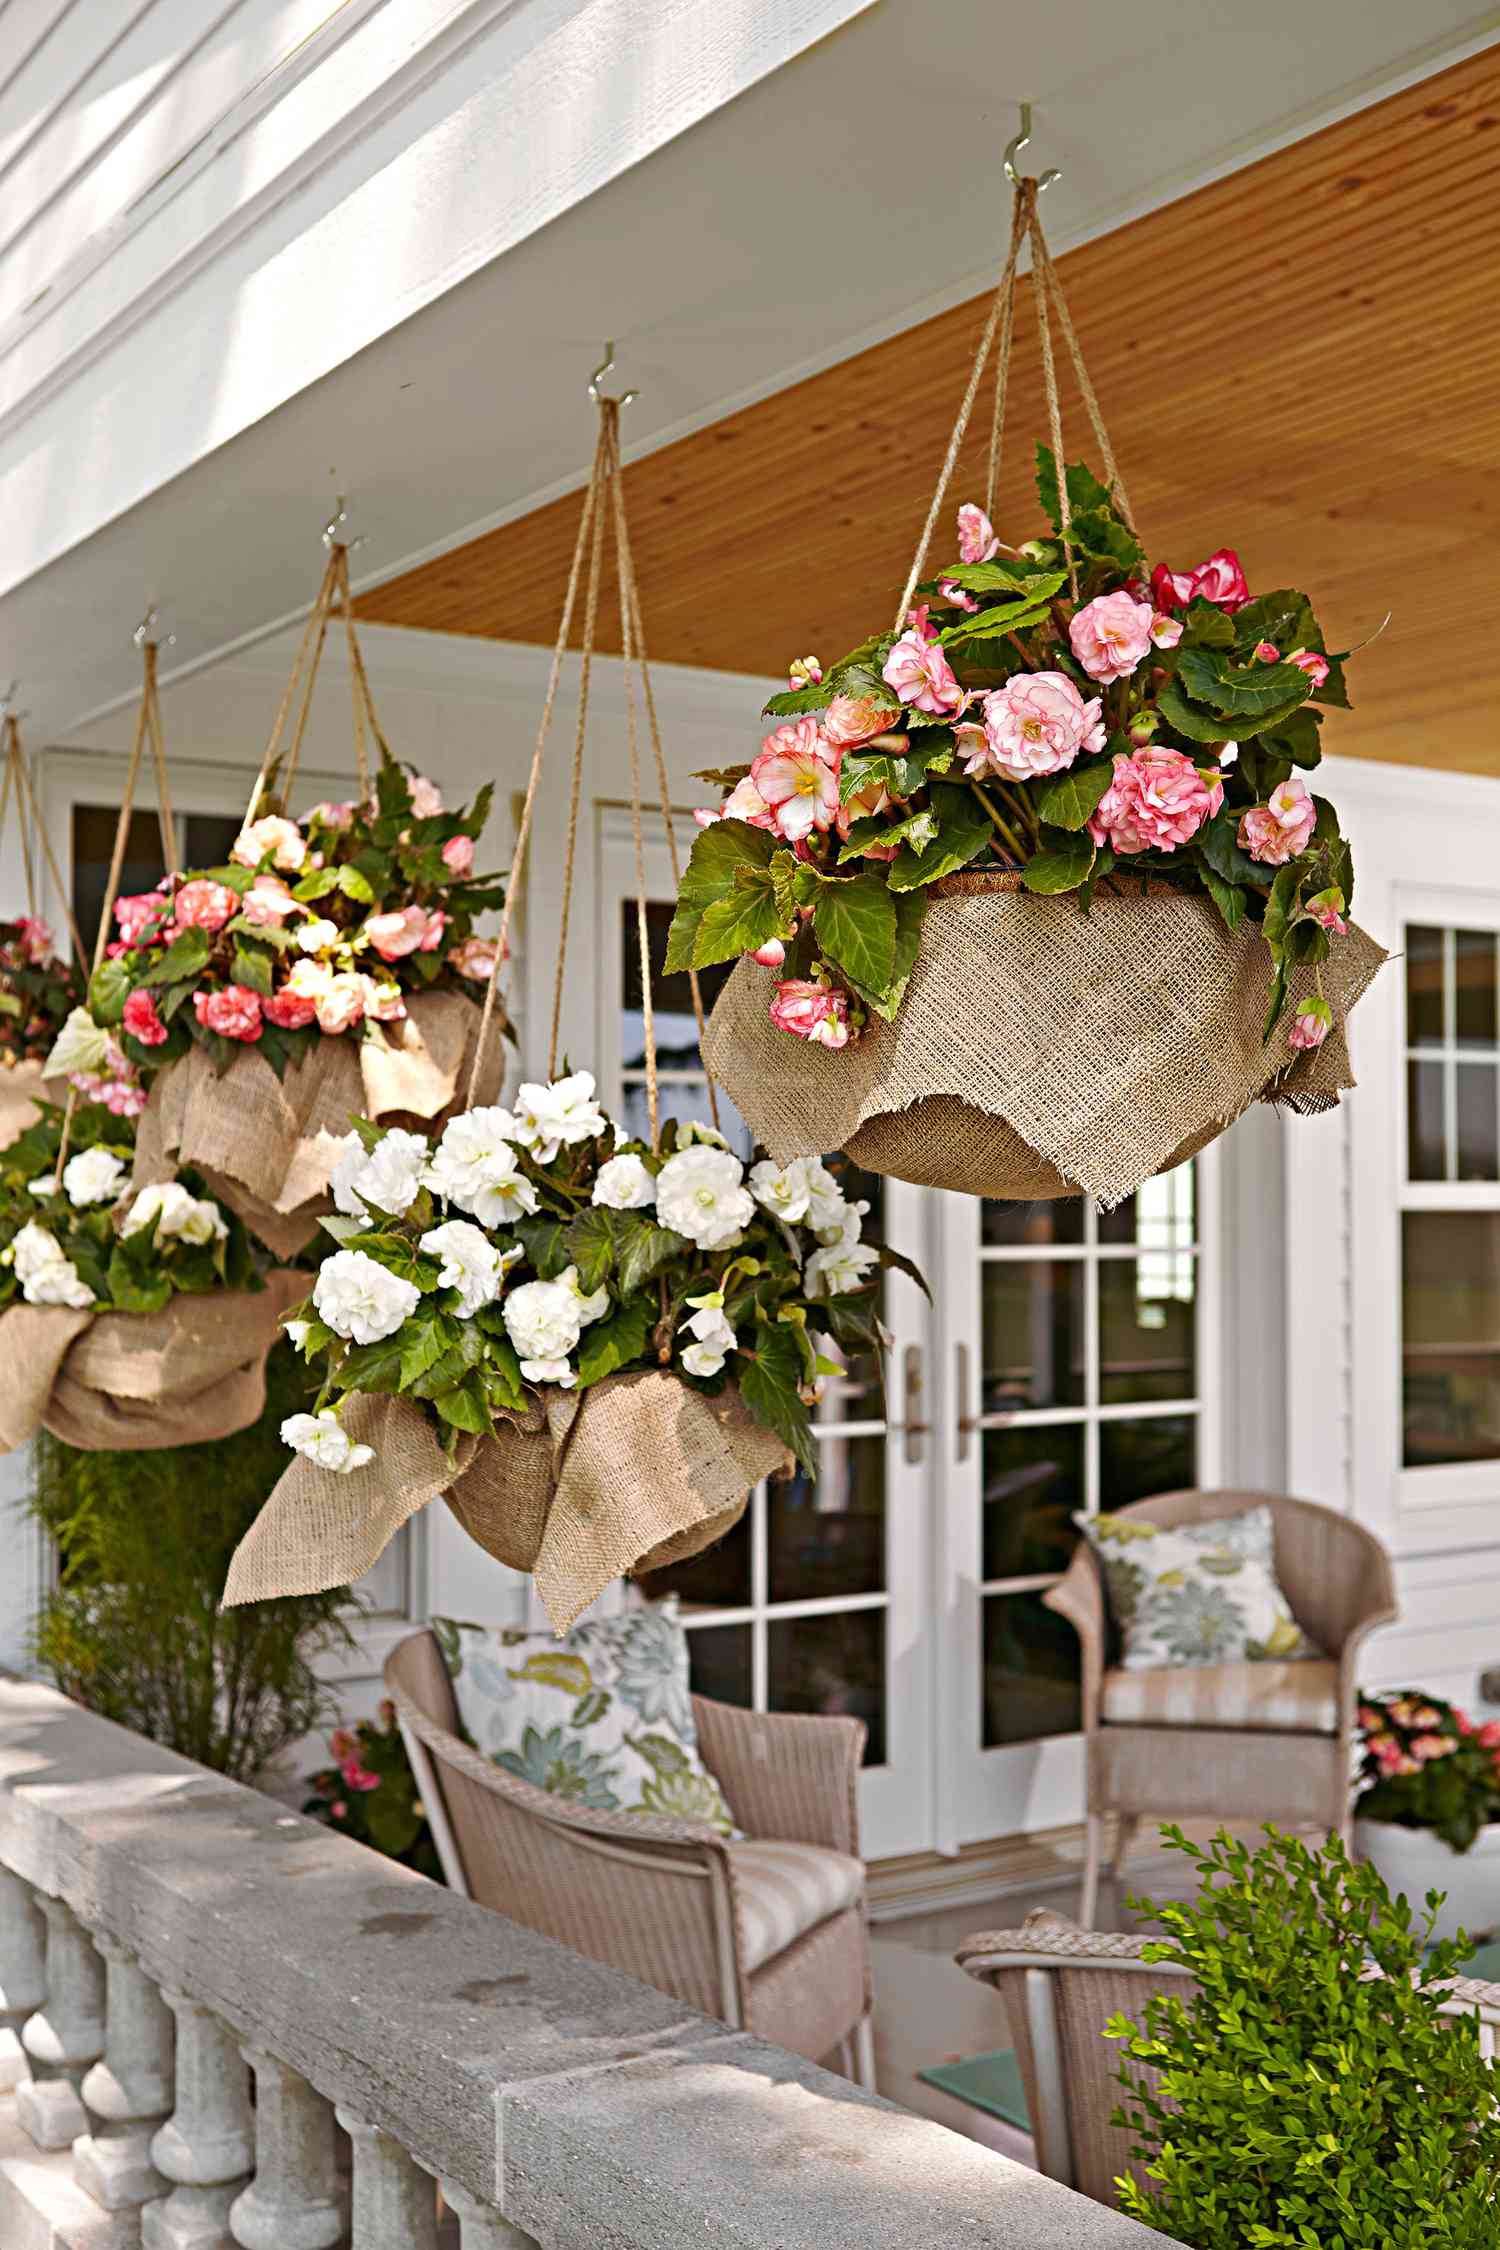 How to Make a Burlap Hanging Basket   Better Homes & Gardens